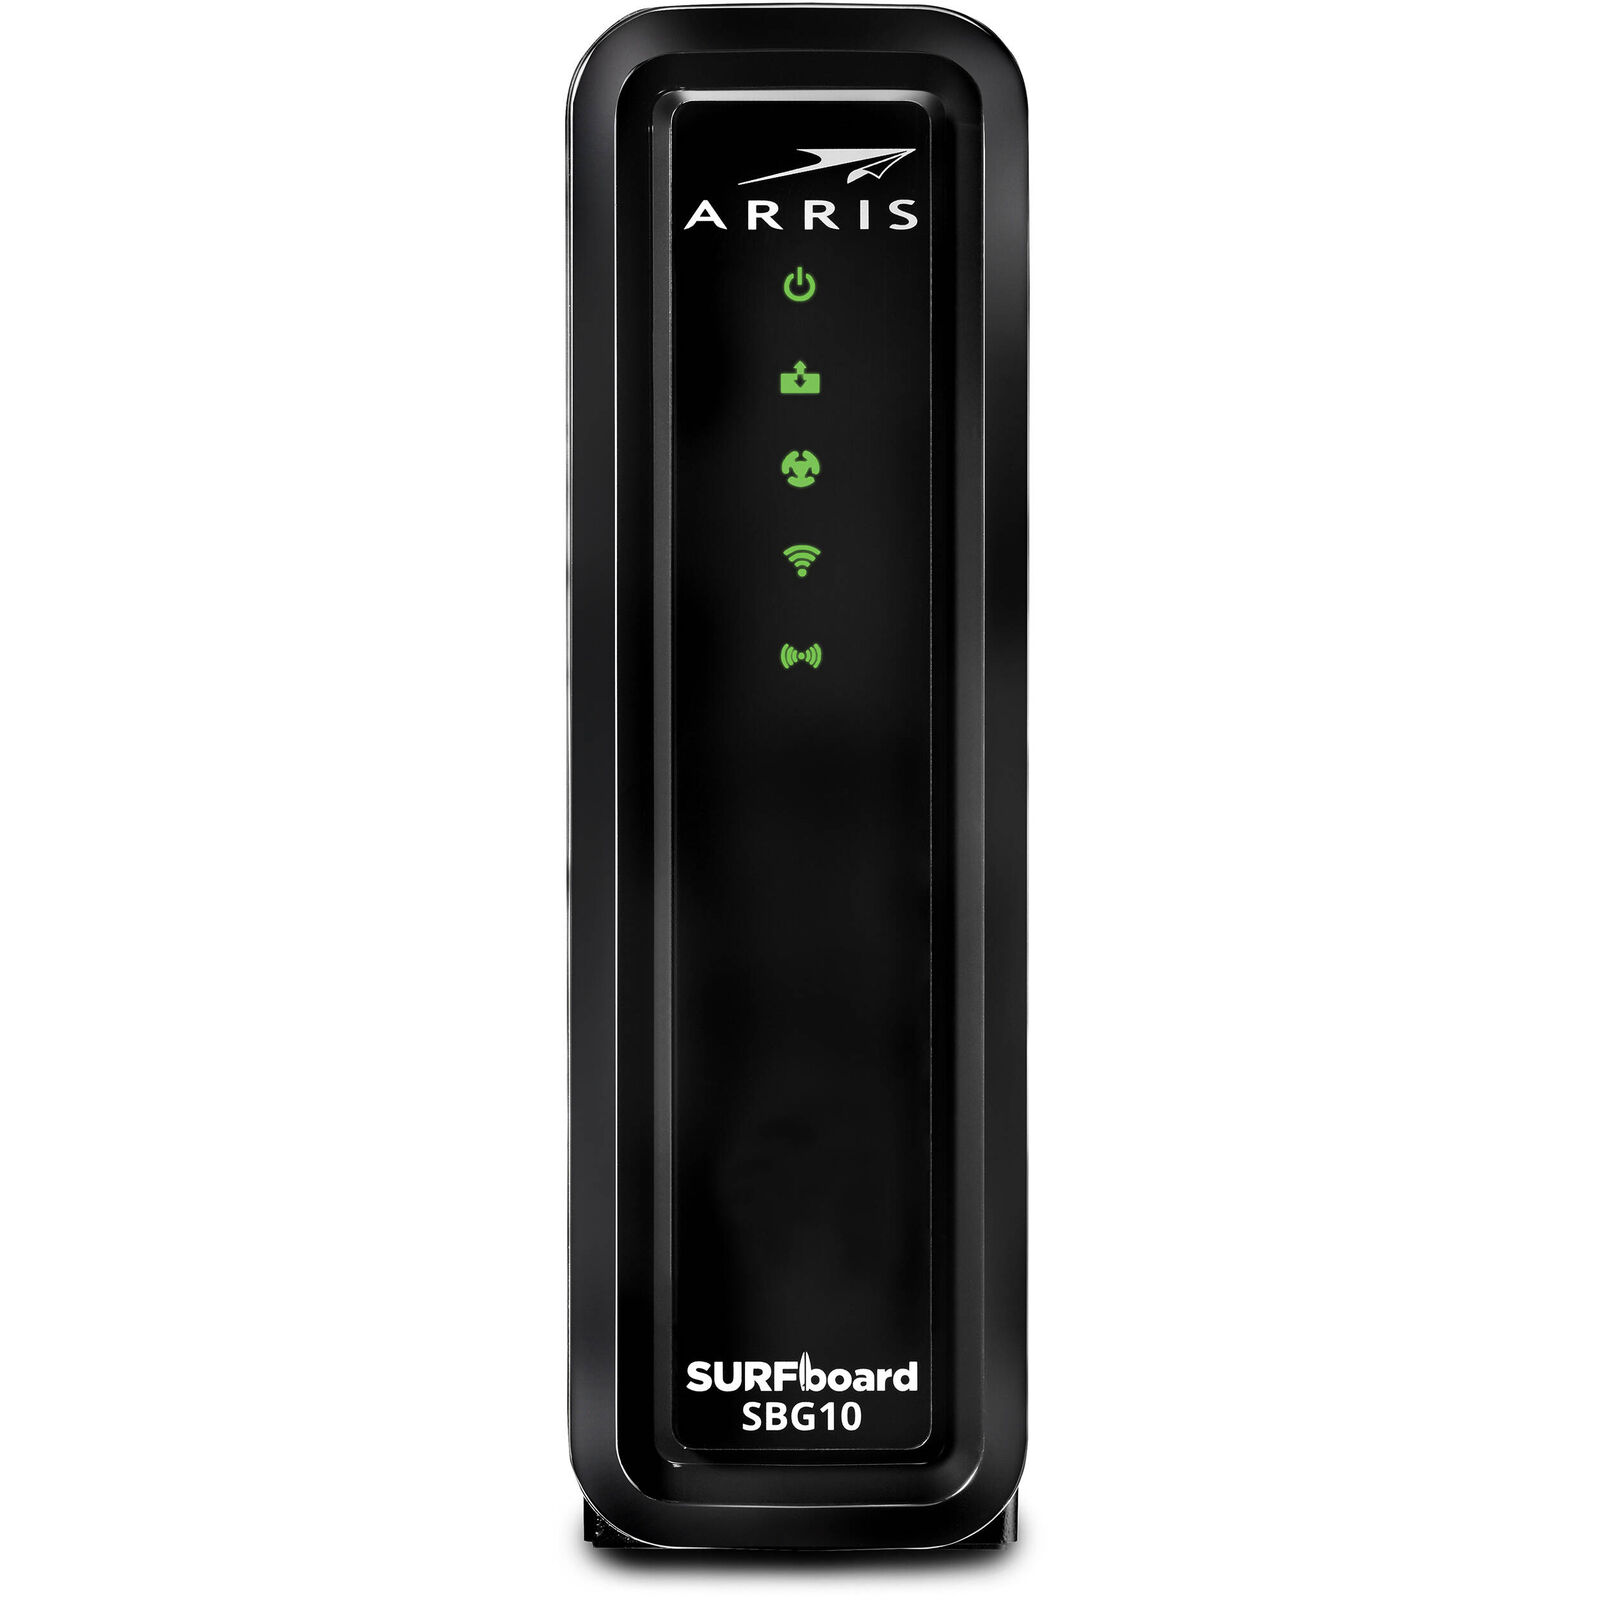 ARRIS SURFboard SBG10-RB DOCSIS 3.0 Cable Modem Router - Certified Refurbished